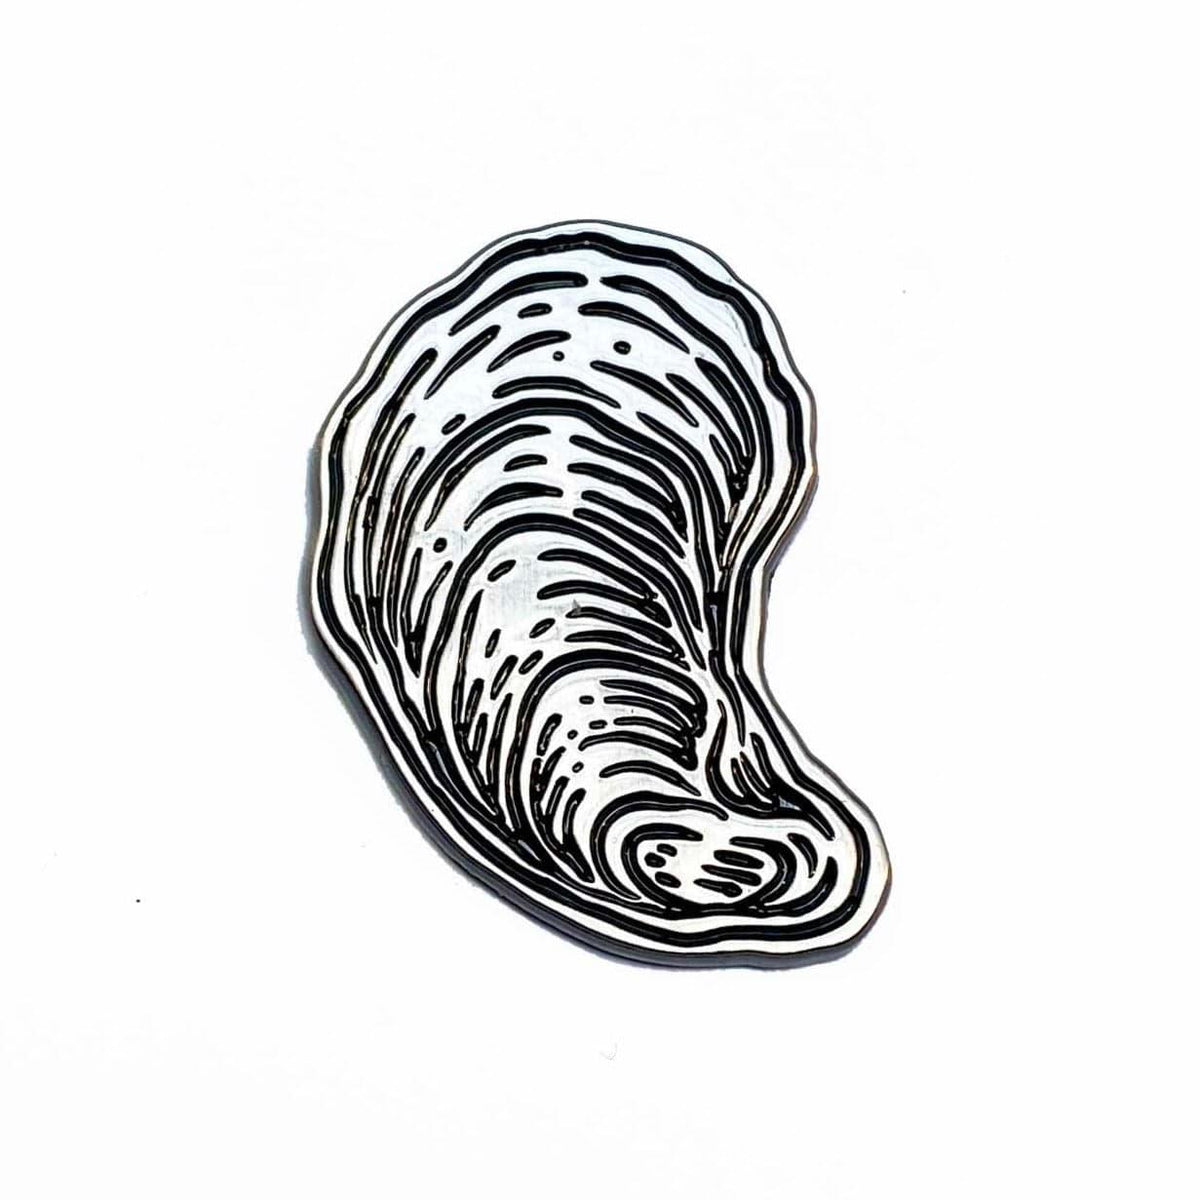 A black and white drawing of an Oyster Enamel Pin by The Wild Wander on a white surface.